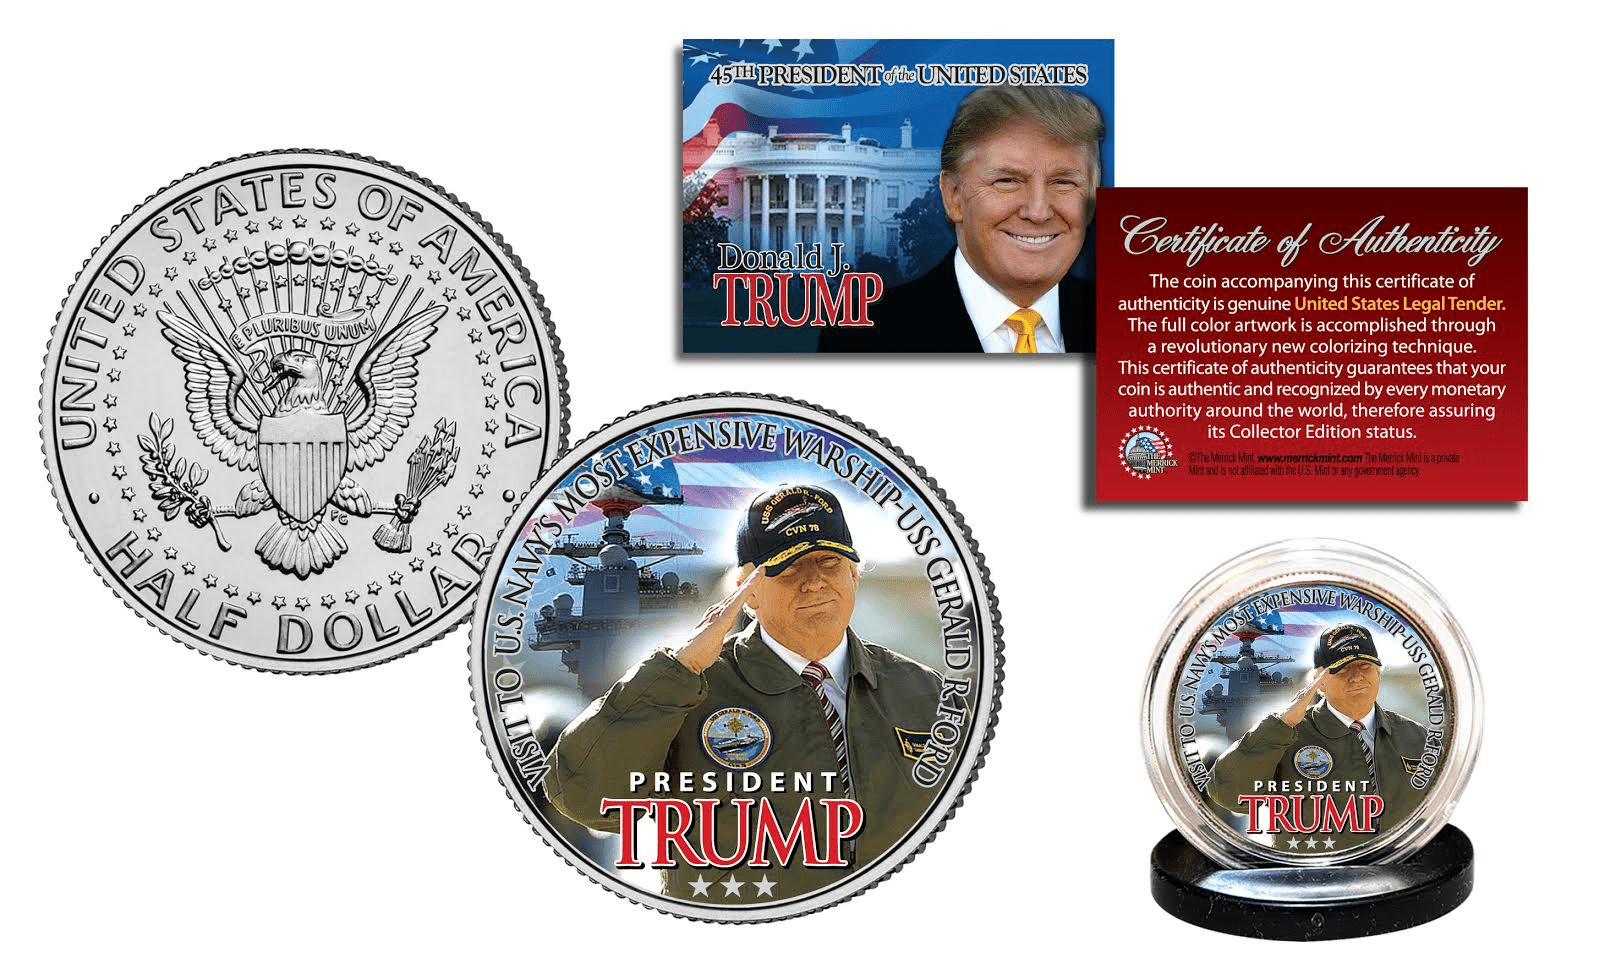 First Lady Melania Trump Commemorative Novelty Coin Donald Trump Coin Collection 2017 Happy Collecting 